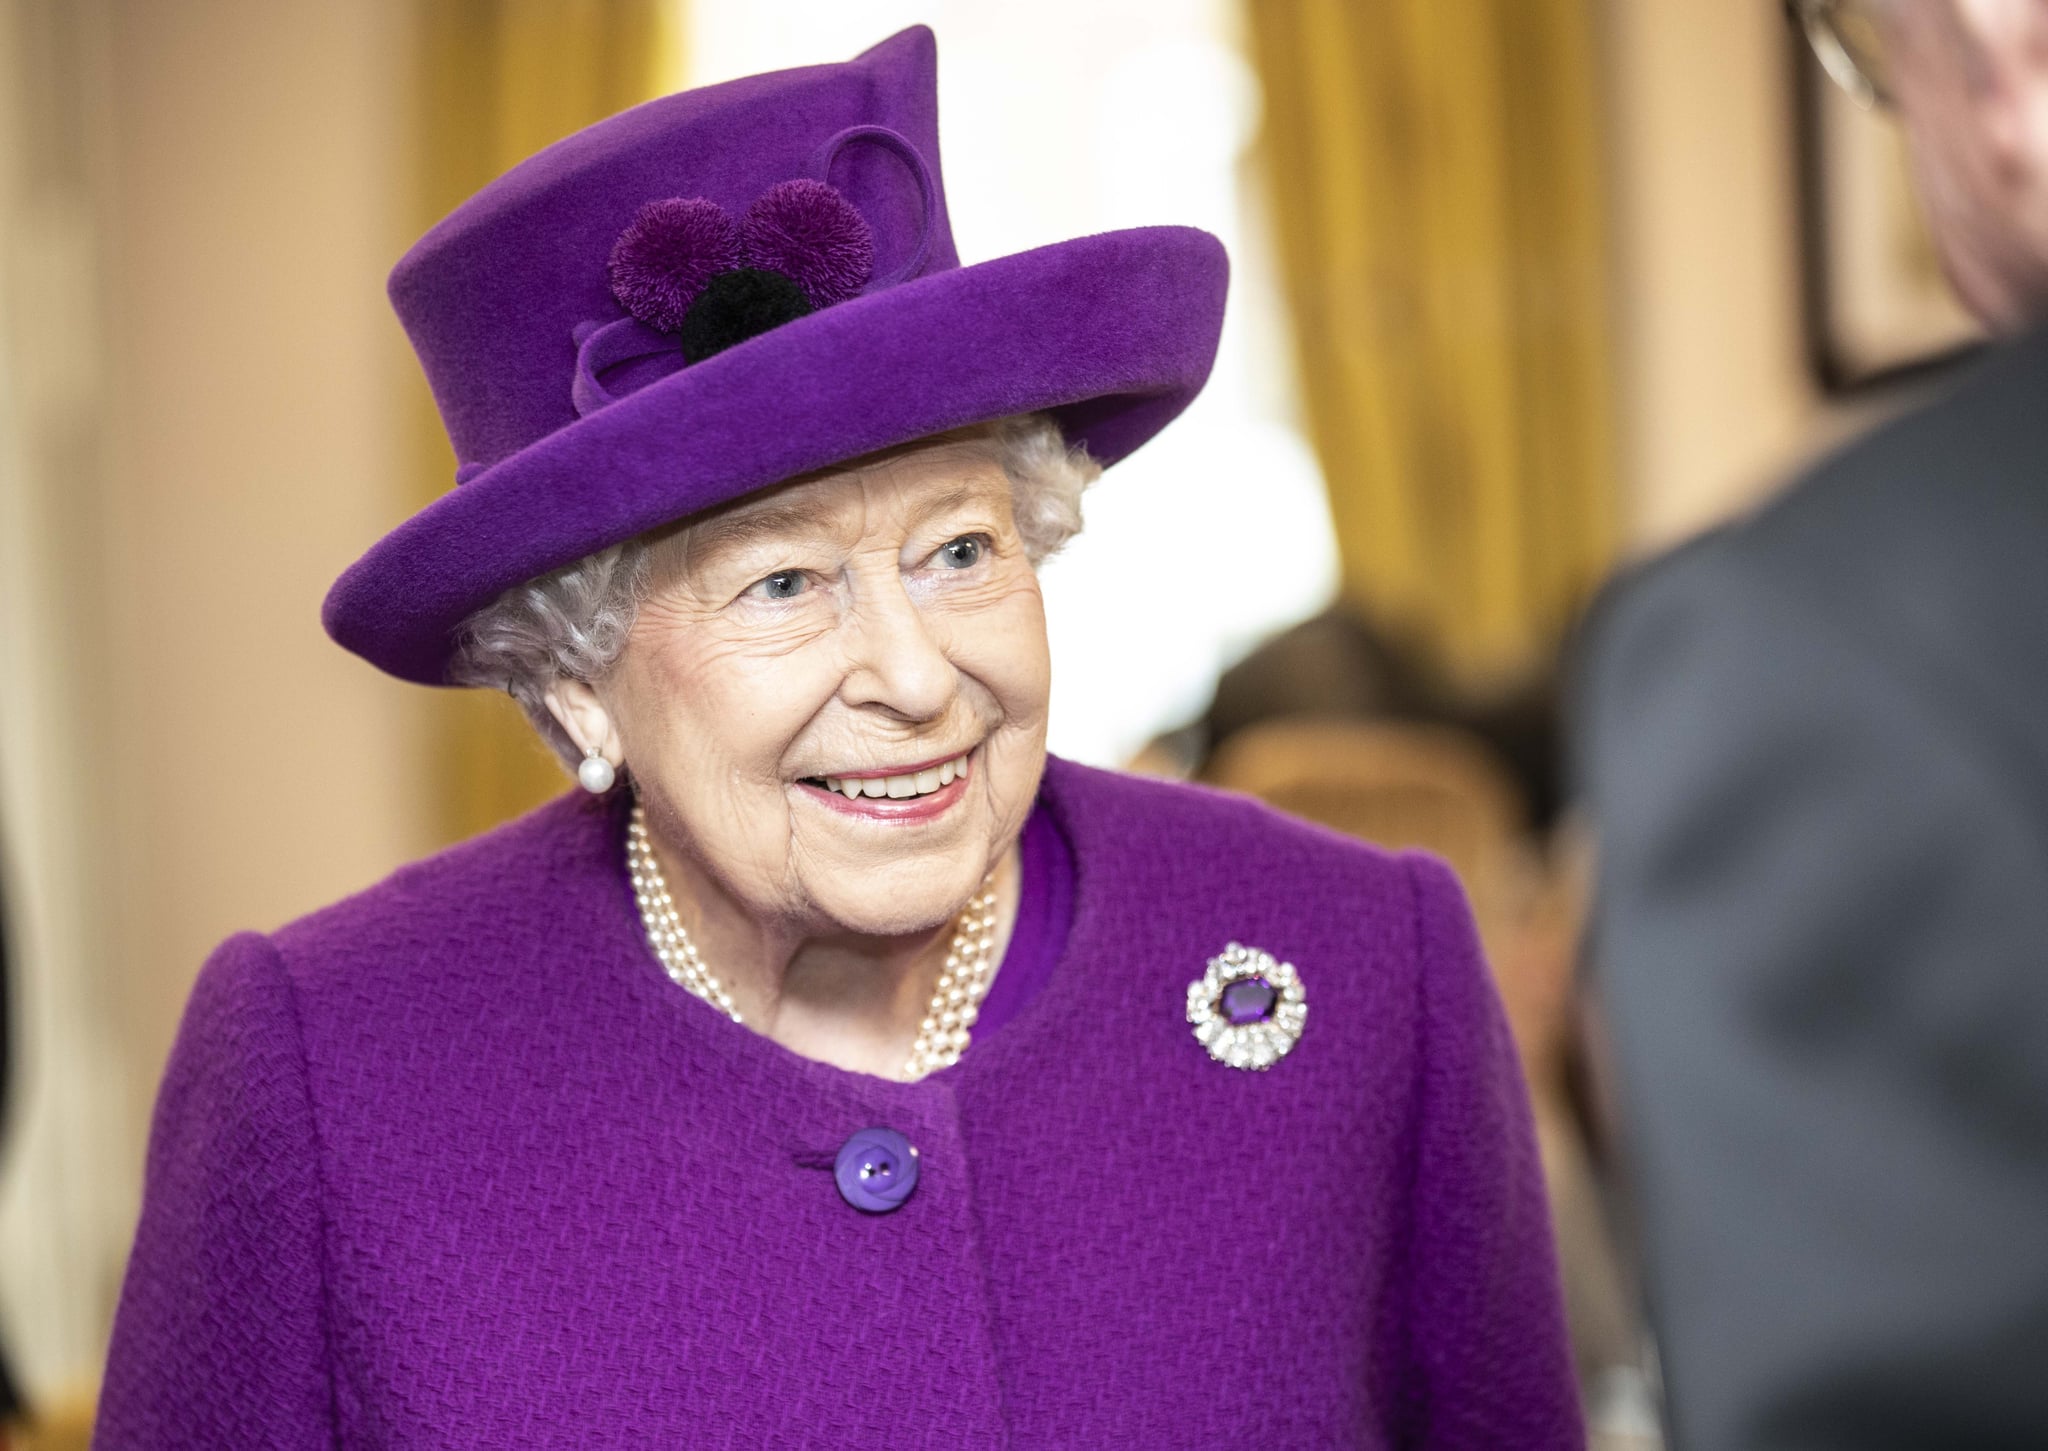 AYLESFORD, ENGLAND - NOVEMBER 06: Queen Elizabeth II talks with residents in the new Appleton Lodge care facility run by the RBLI during a visit to the Royal British Legion Industries village to celebrate the charity's centenary year on November 6, 2019 in Aylesford, England. (Photo by Richard Pohle - WPA Pool/Getty Images)